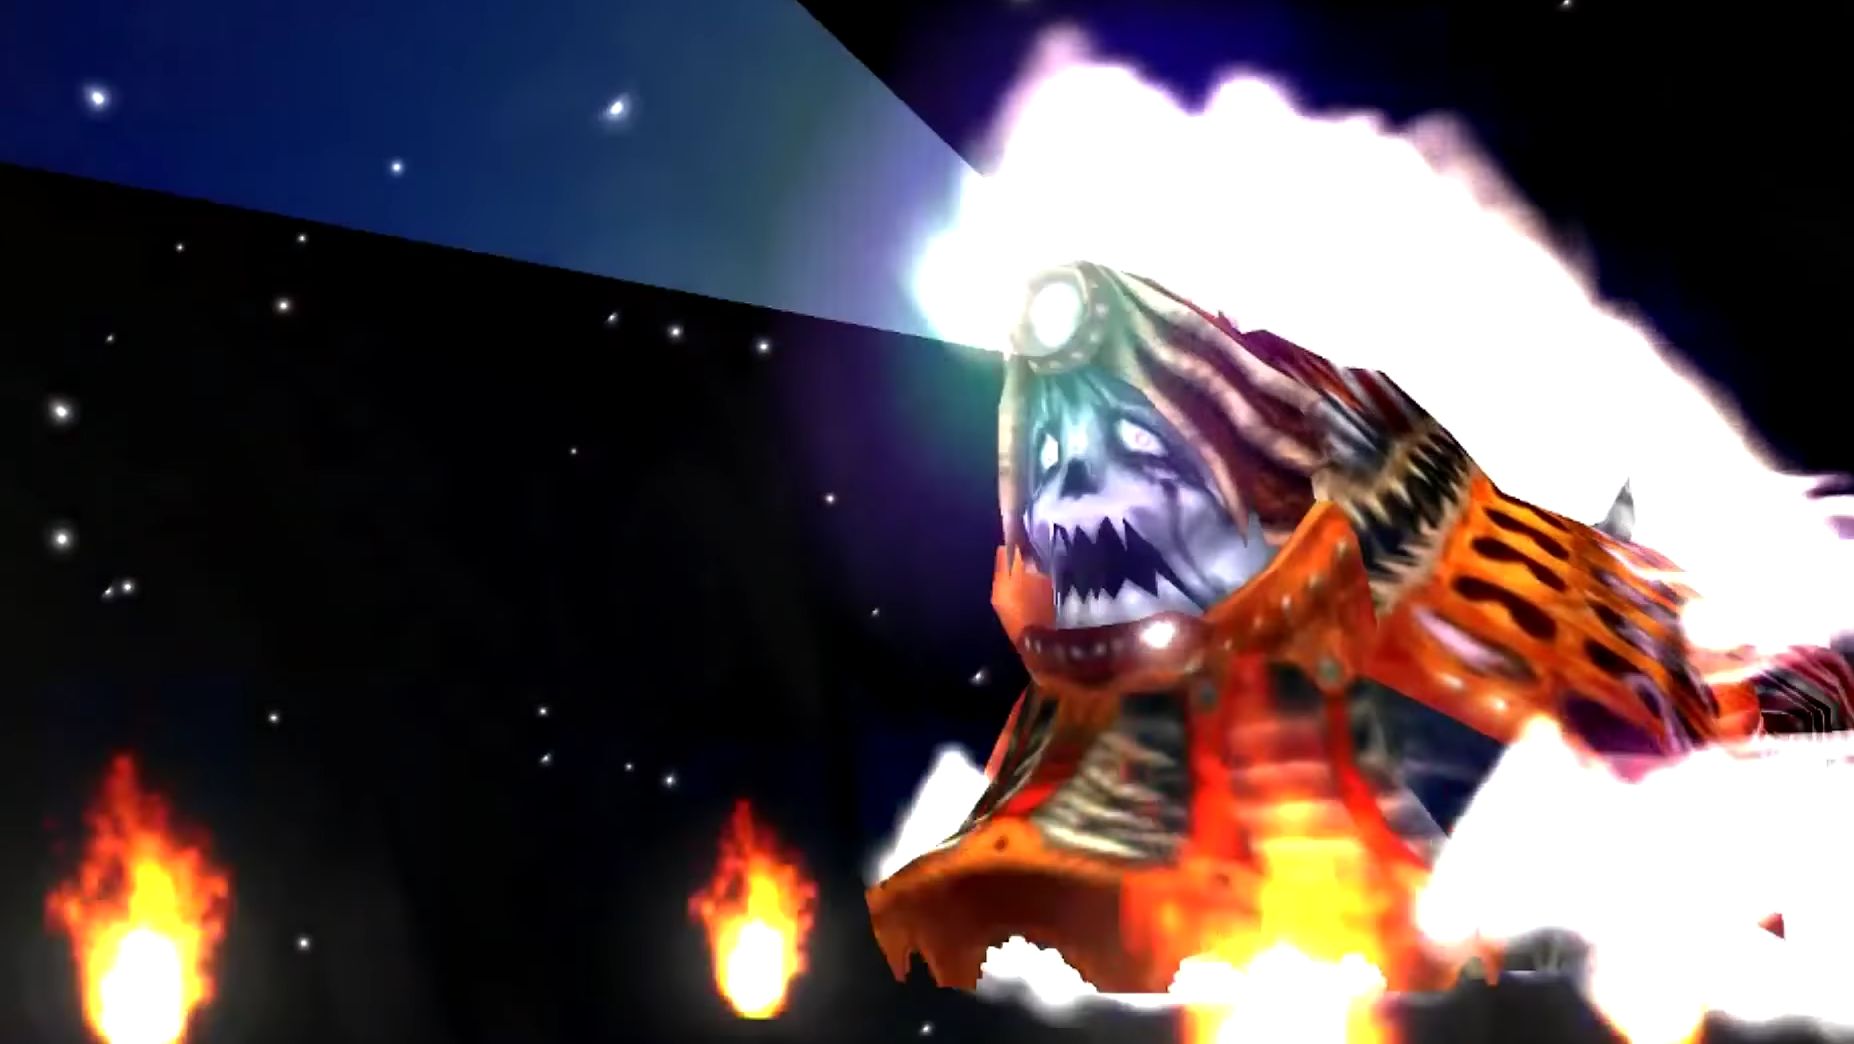 Doomtrain (a flaming, old fashioned steam train with a demonic face) from the Final Fantasy series